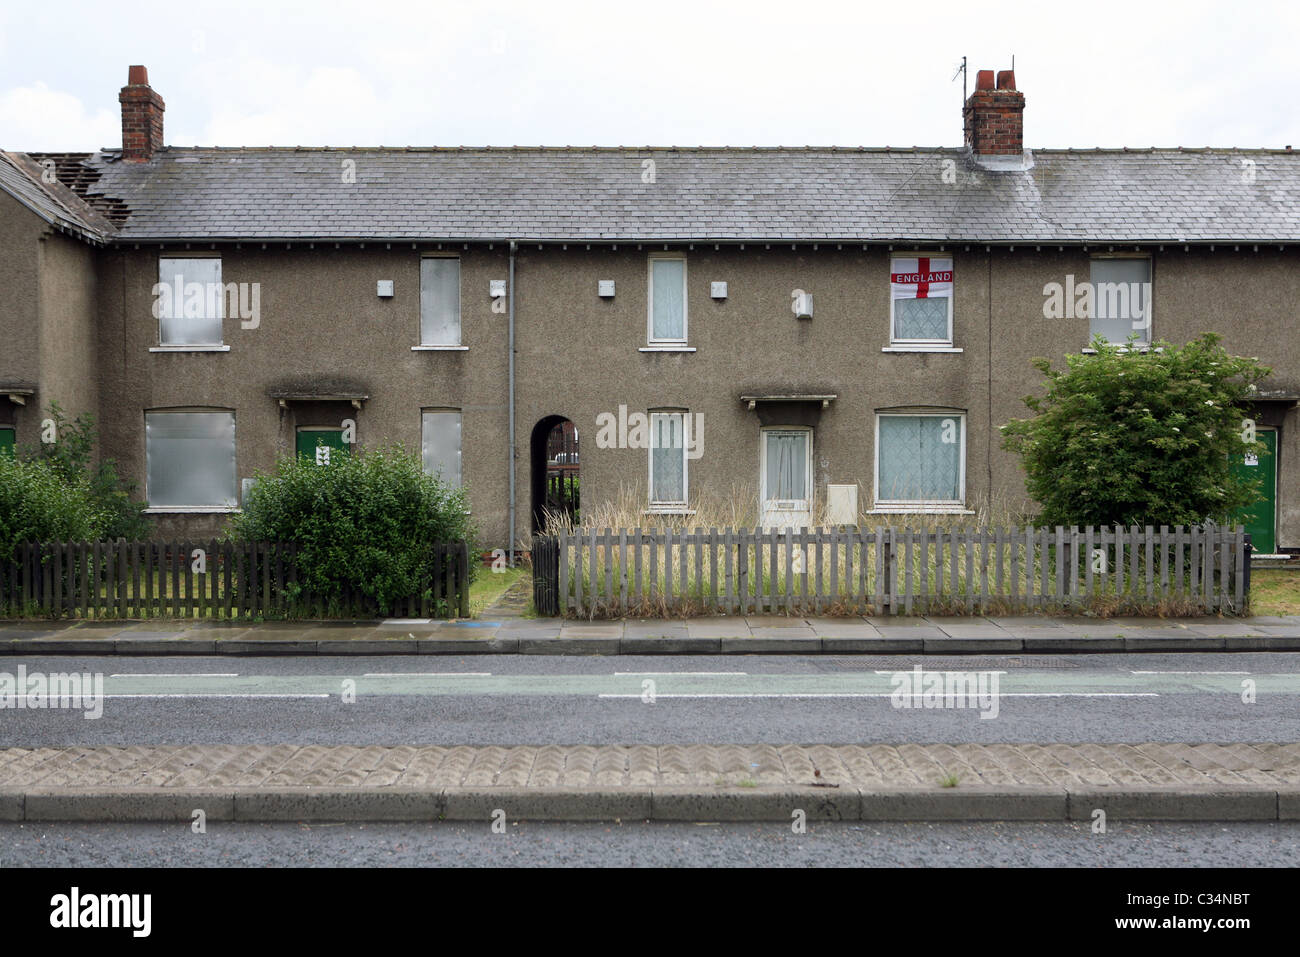 An occupied house displaying the flag of St. George amongst boarded up derelict houses, Grangetown, Middlesbrough, England, UK. Stock Photo